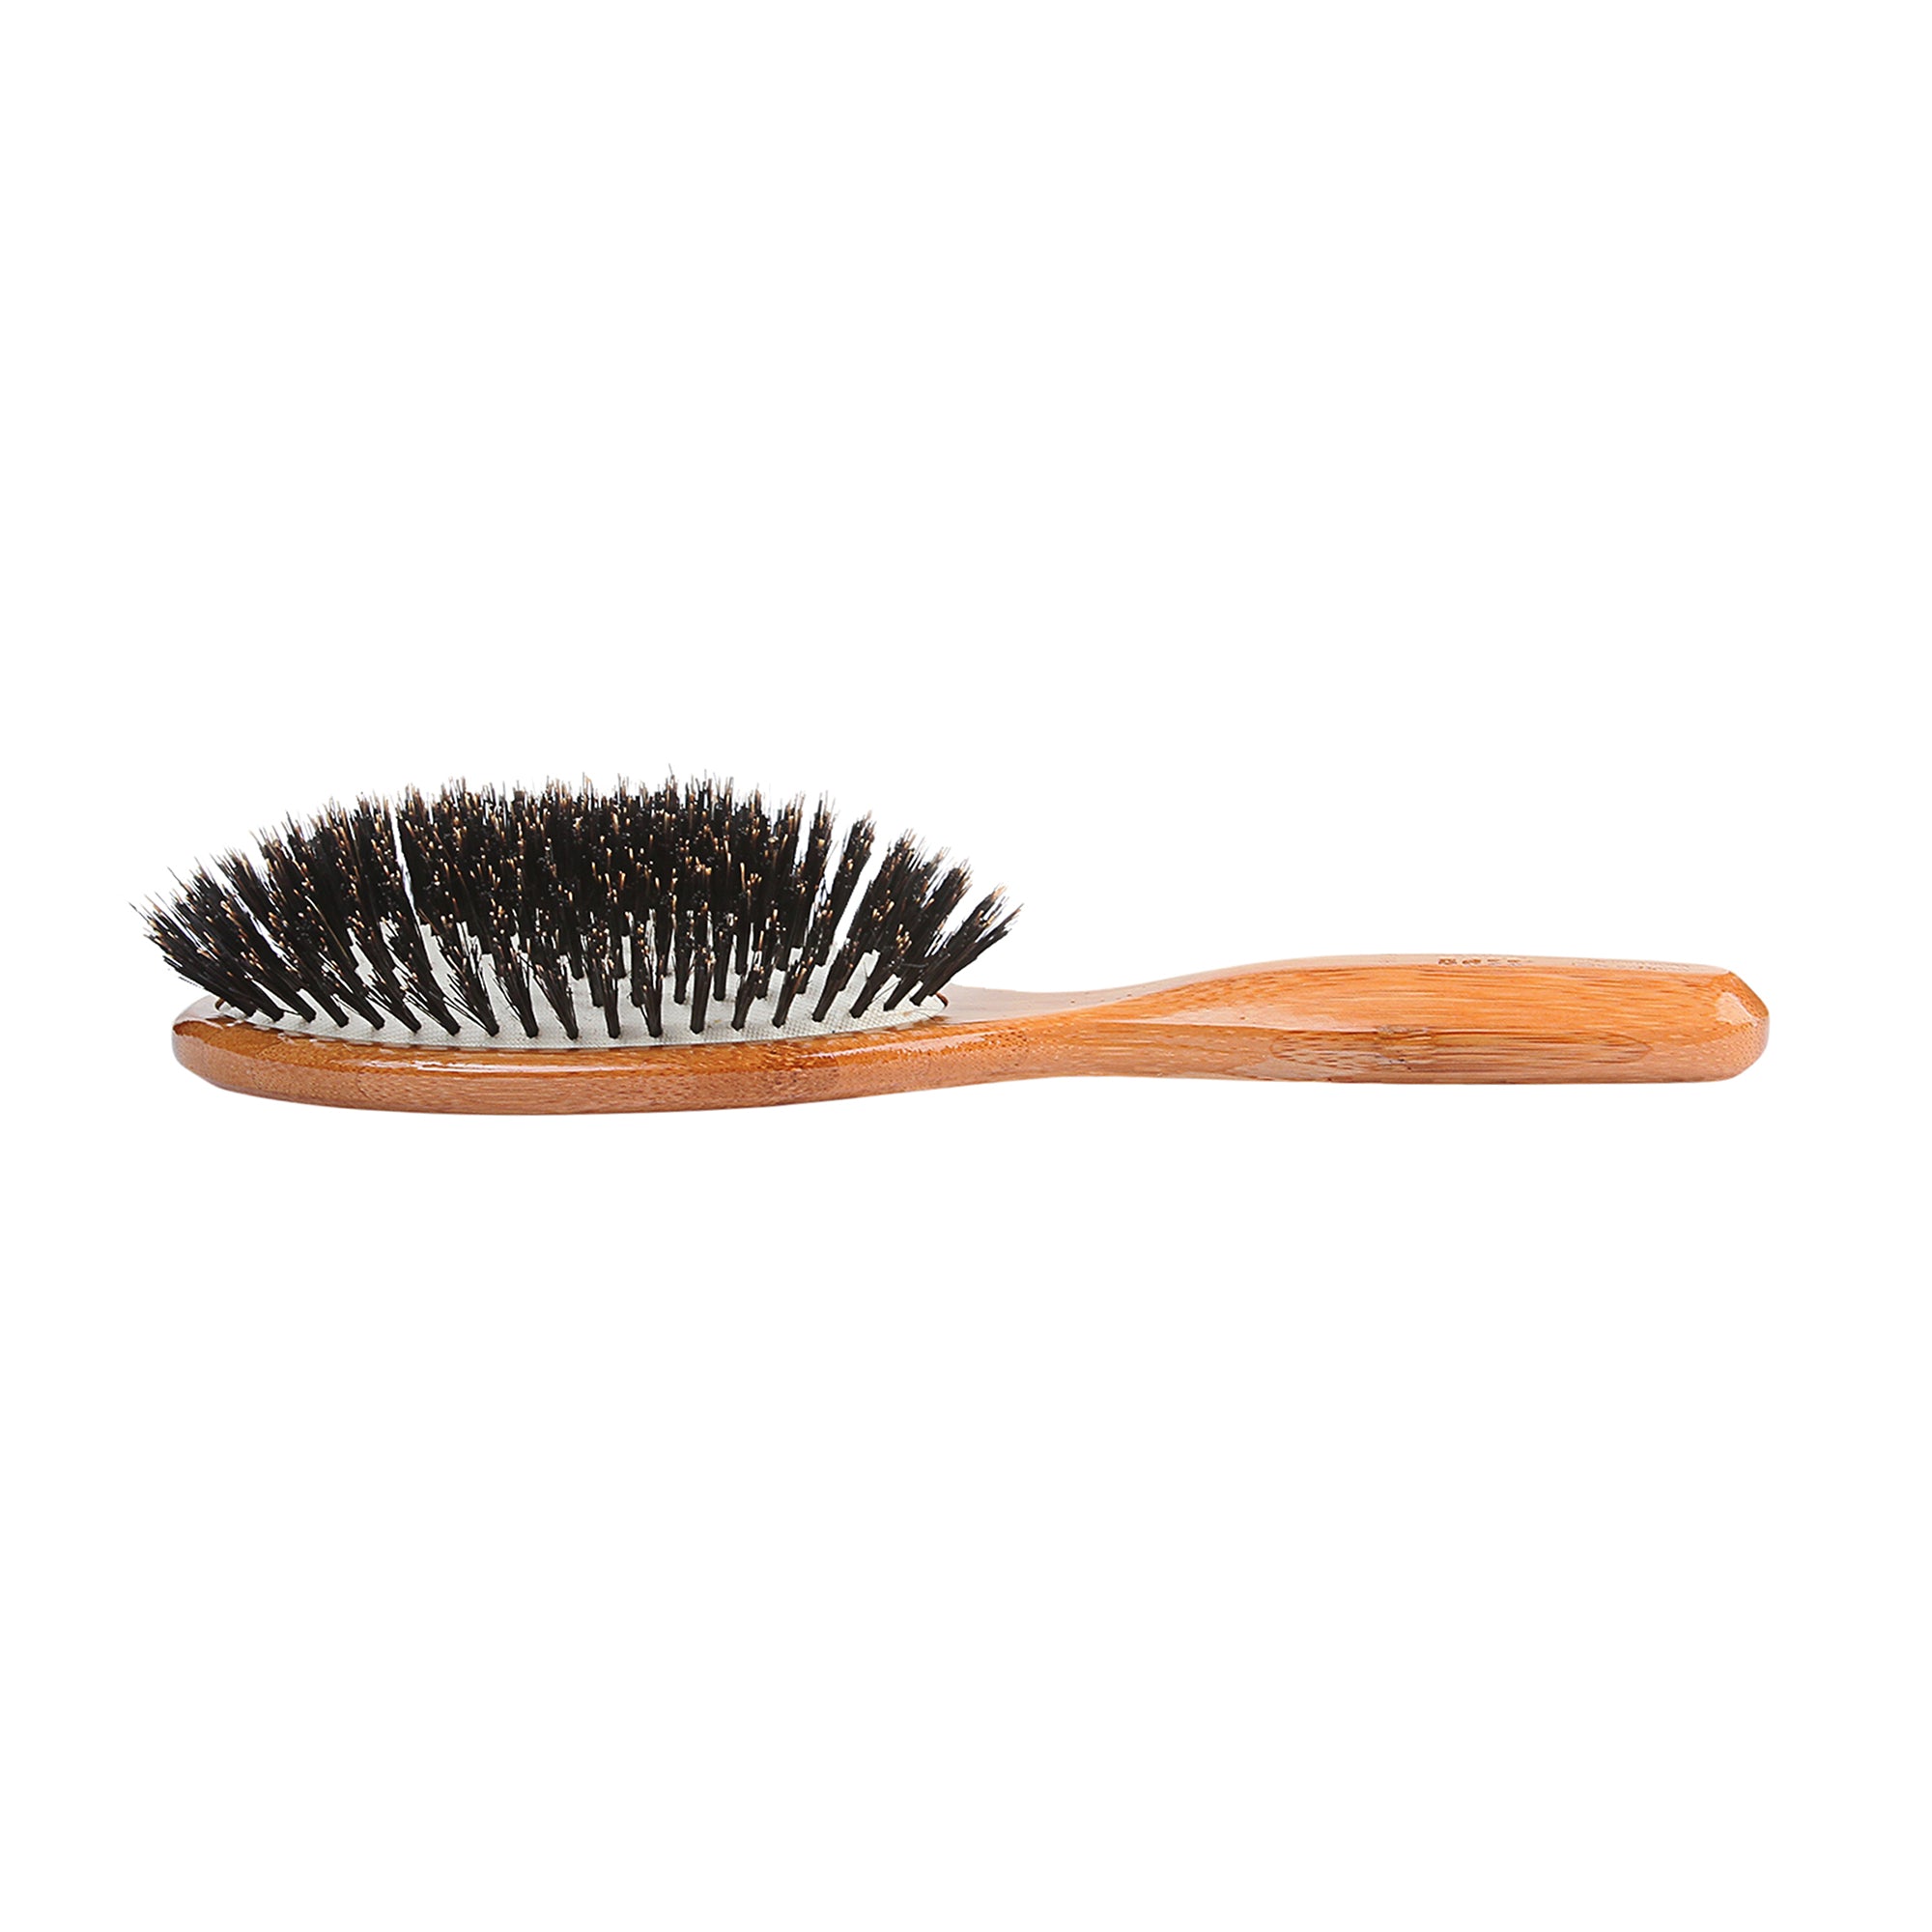 Bass Brushes 899 Dark Bamboo | Large Oval Hairbrush with Firm Natural Bristles / 899-DB